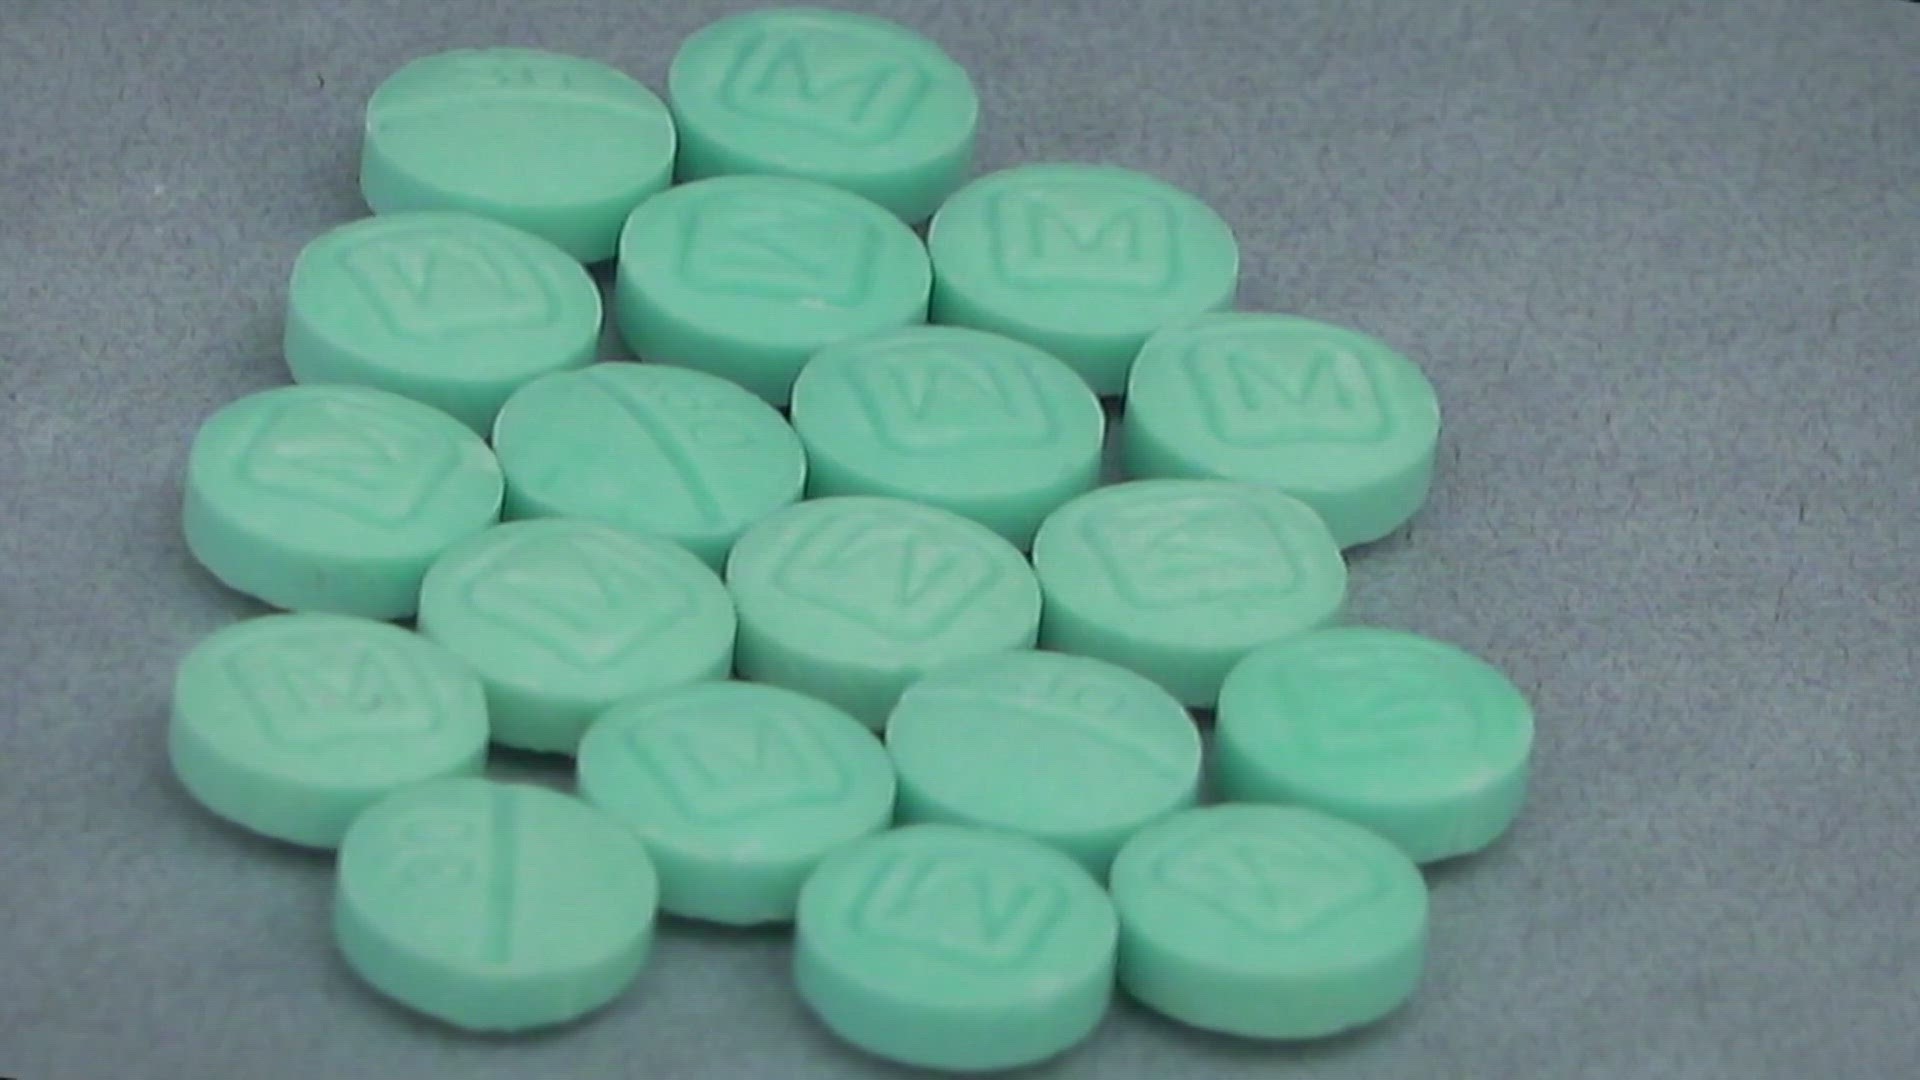 California recently became the first and only state to require fentanyl tests during emergency room drug screenings.